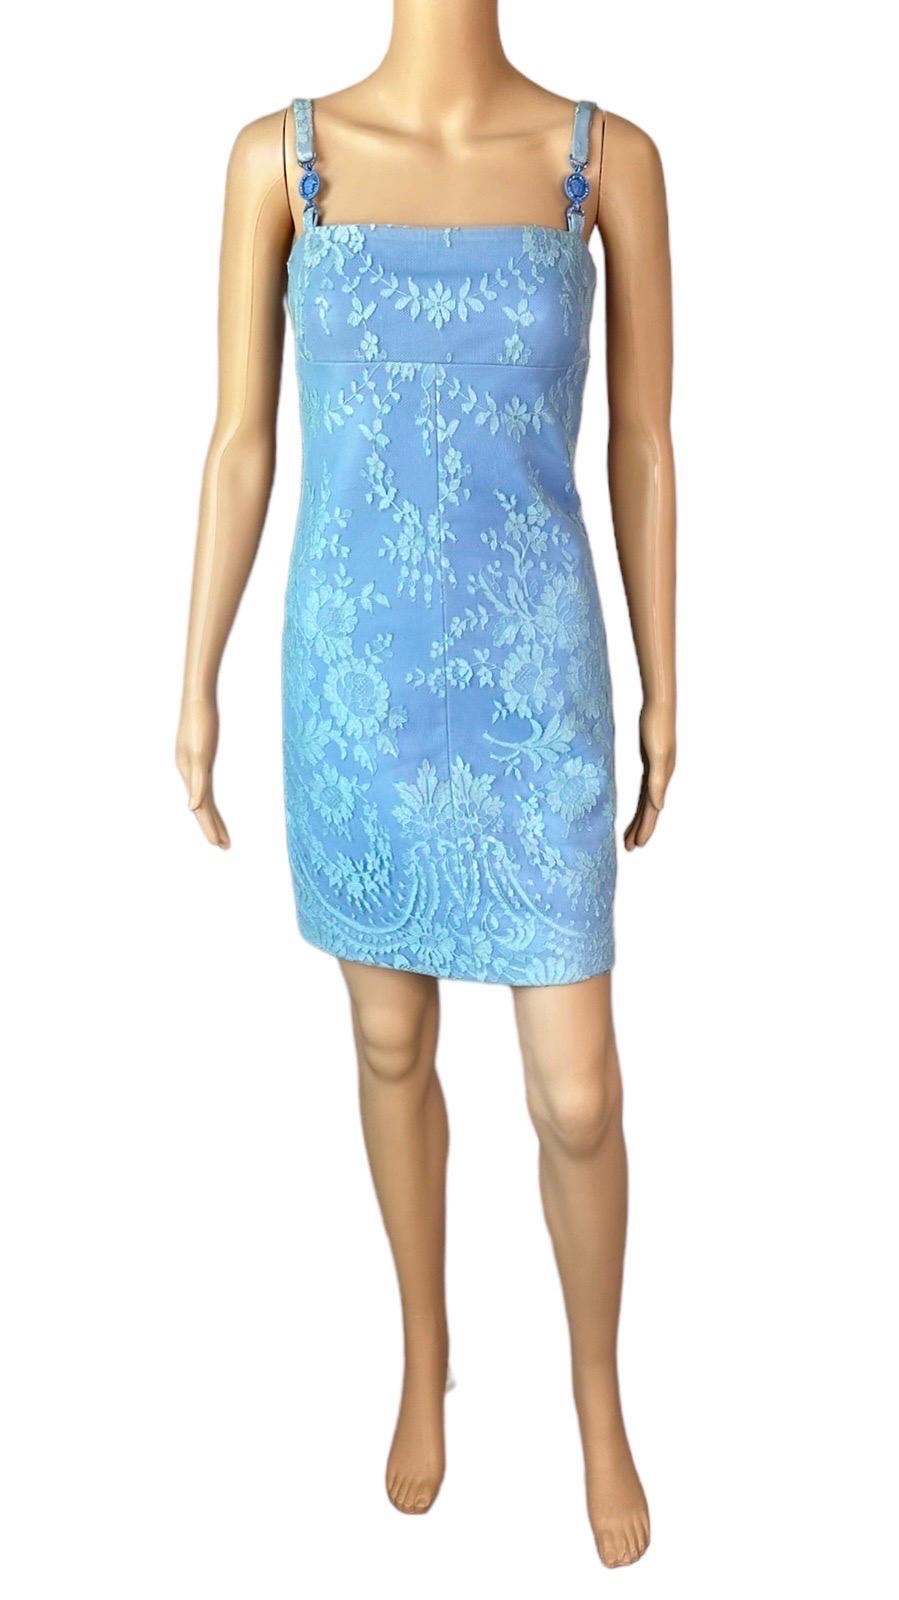 Gianni Versace F/W 1996 Vintage Floral Lace and Leather Blue Mini Dress  For Sale 1